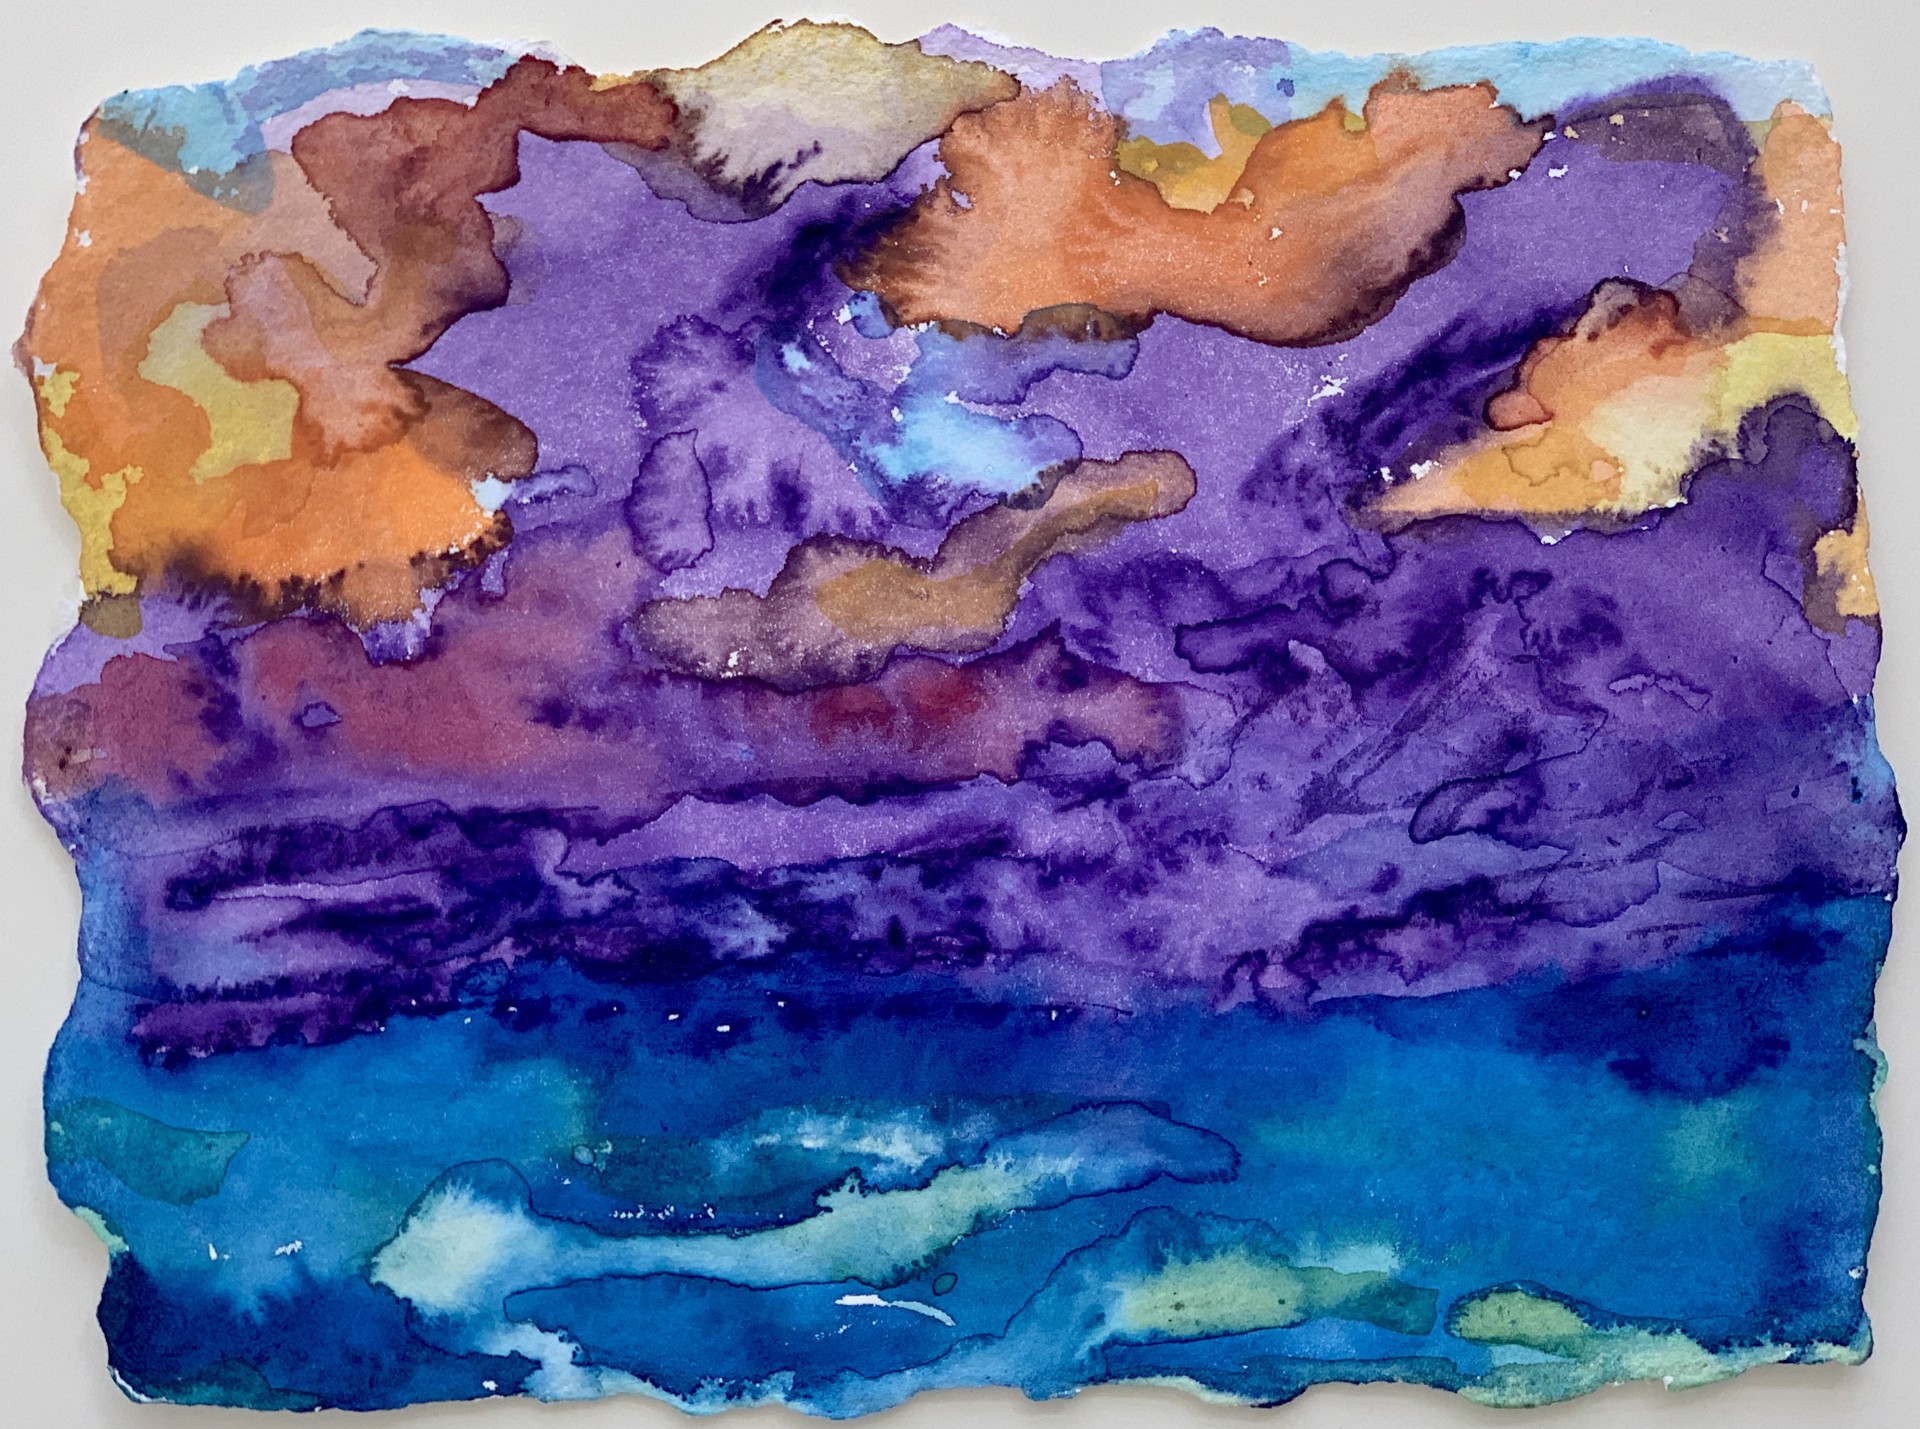 Spring Storms on the Bay 2 by Jennifer Clifford Danner